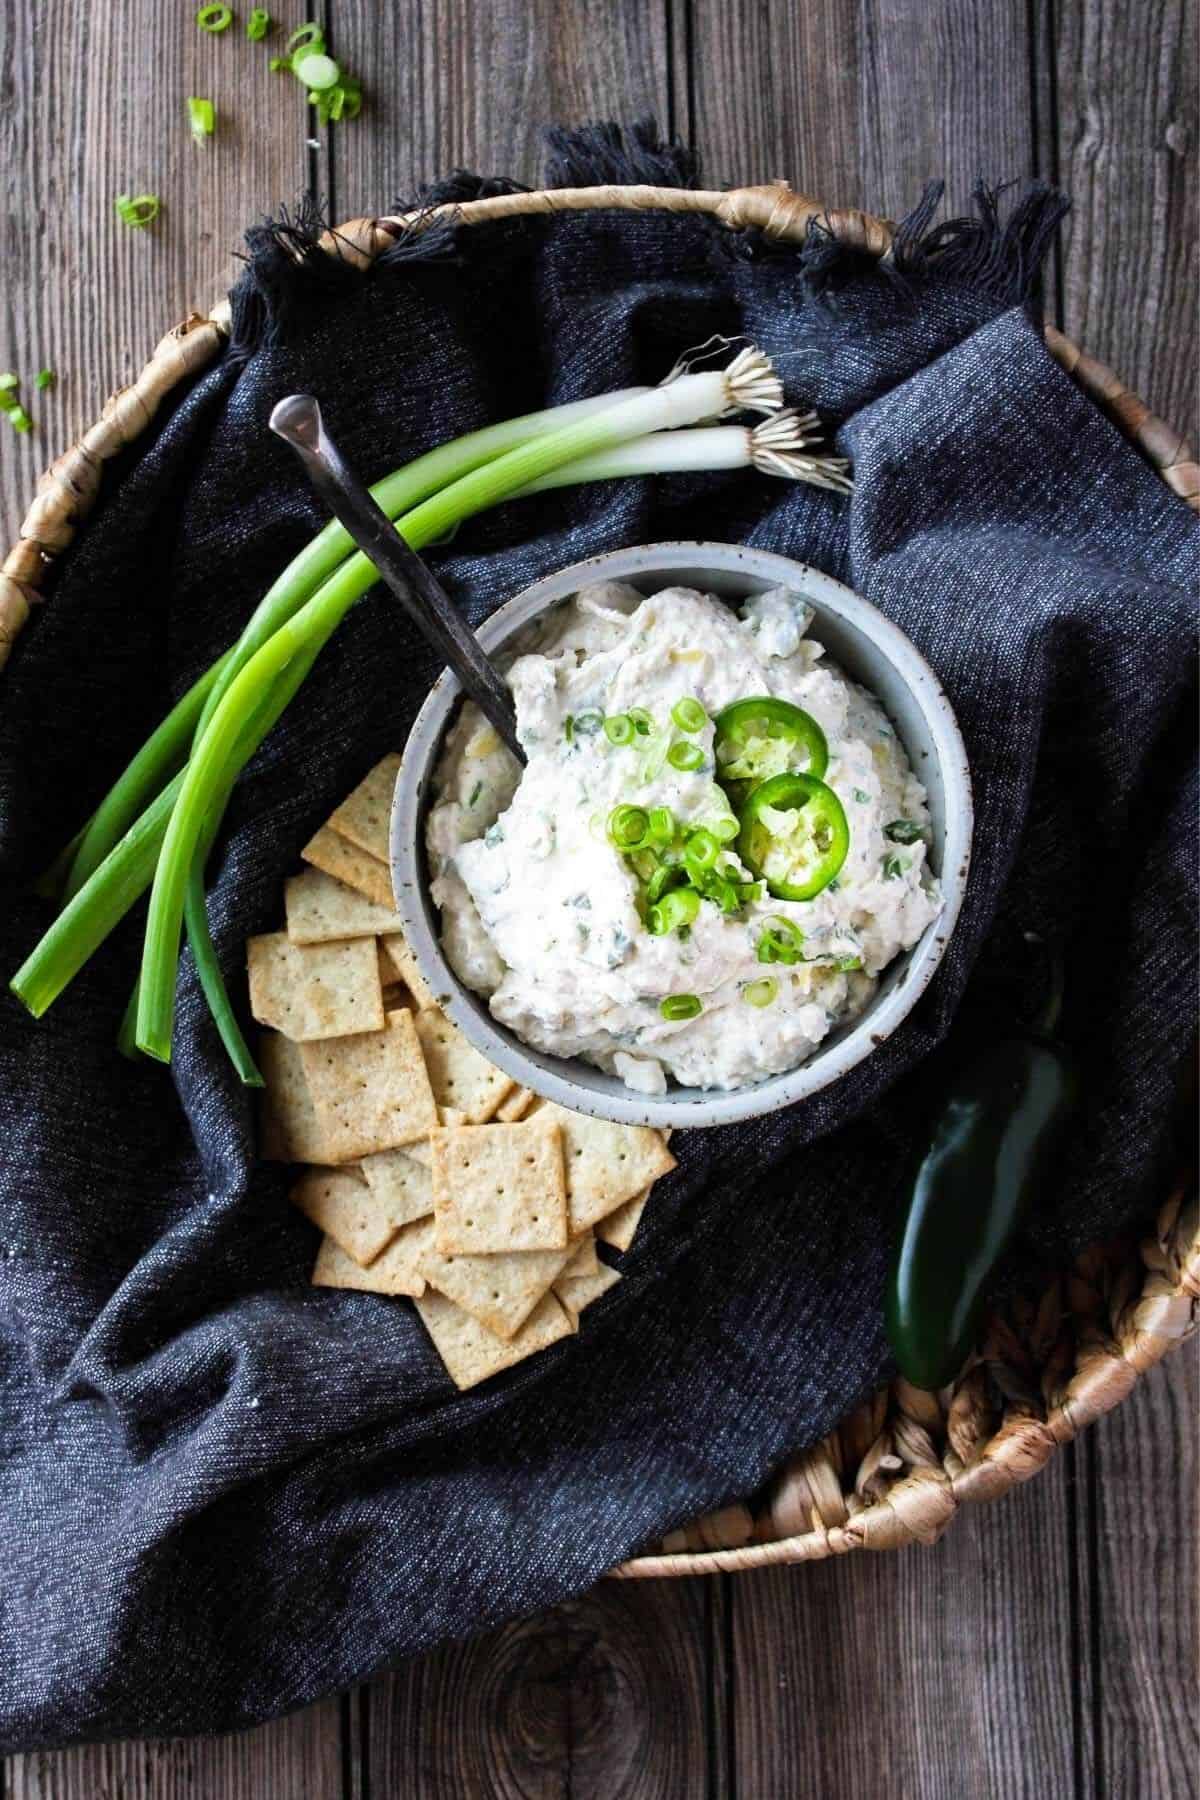 Wicker track with blue towel bowl of artichoke dip with jalapenos and crackers.